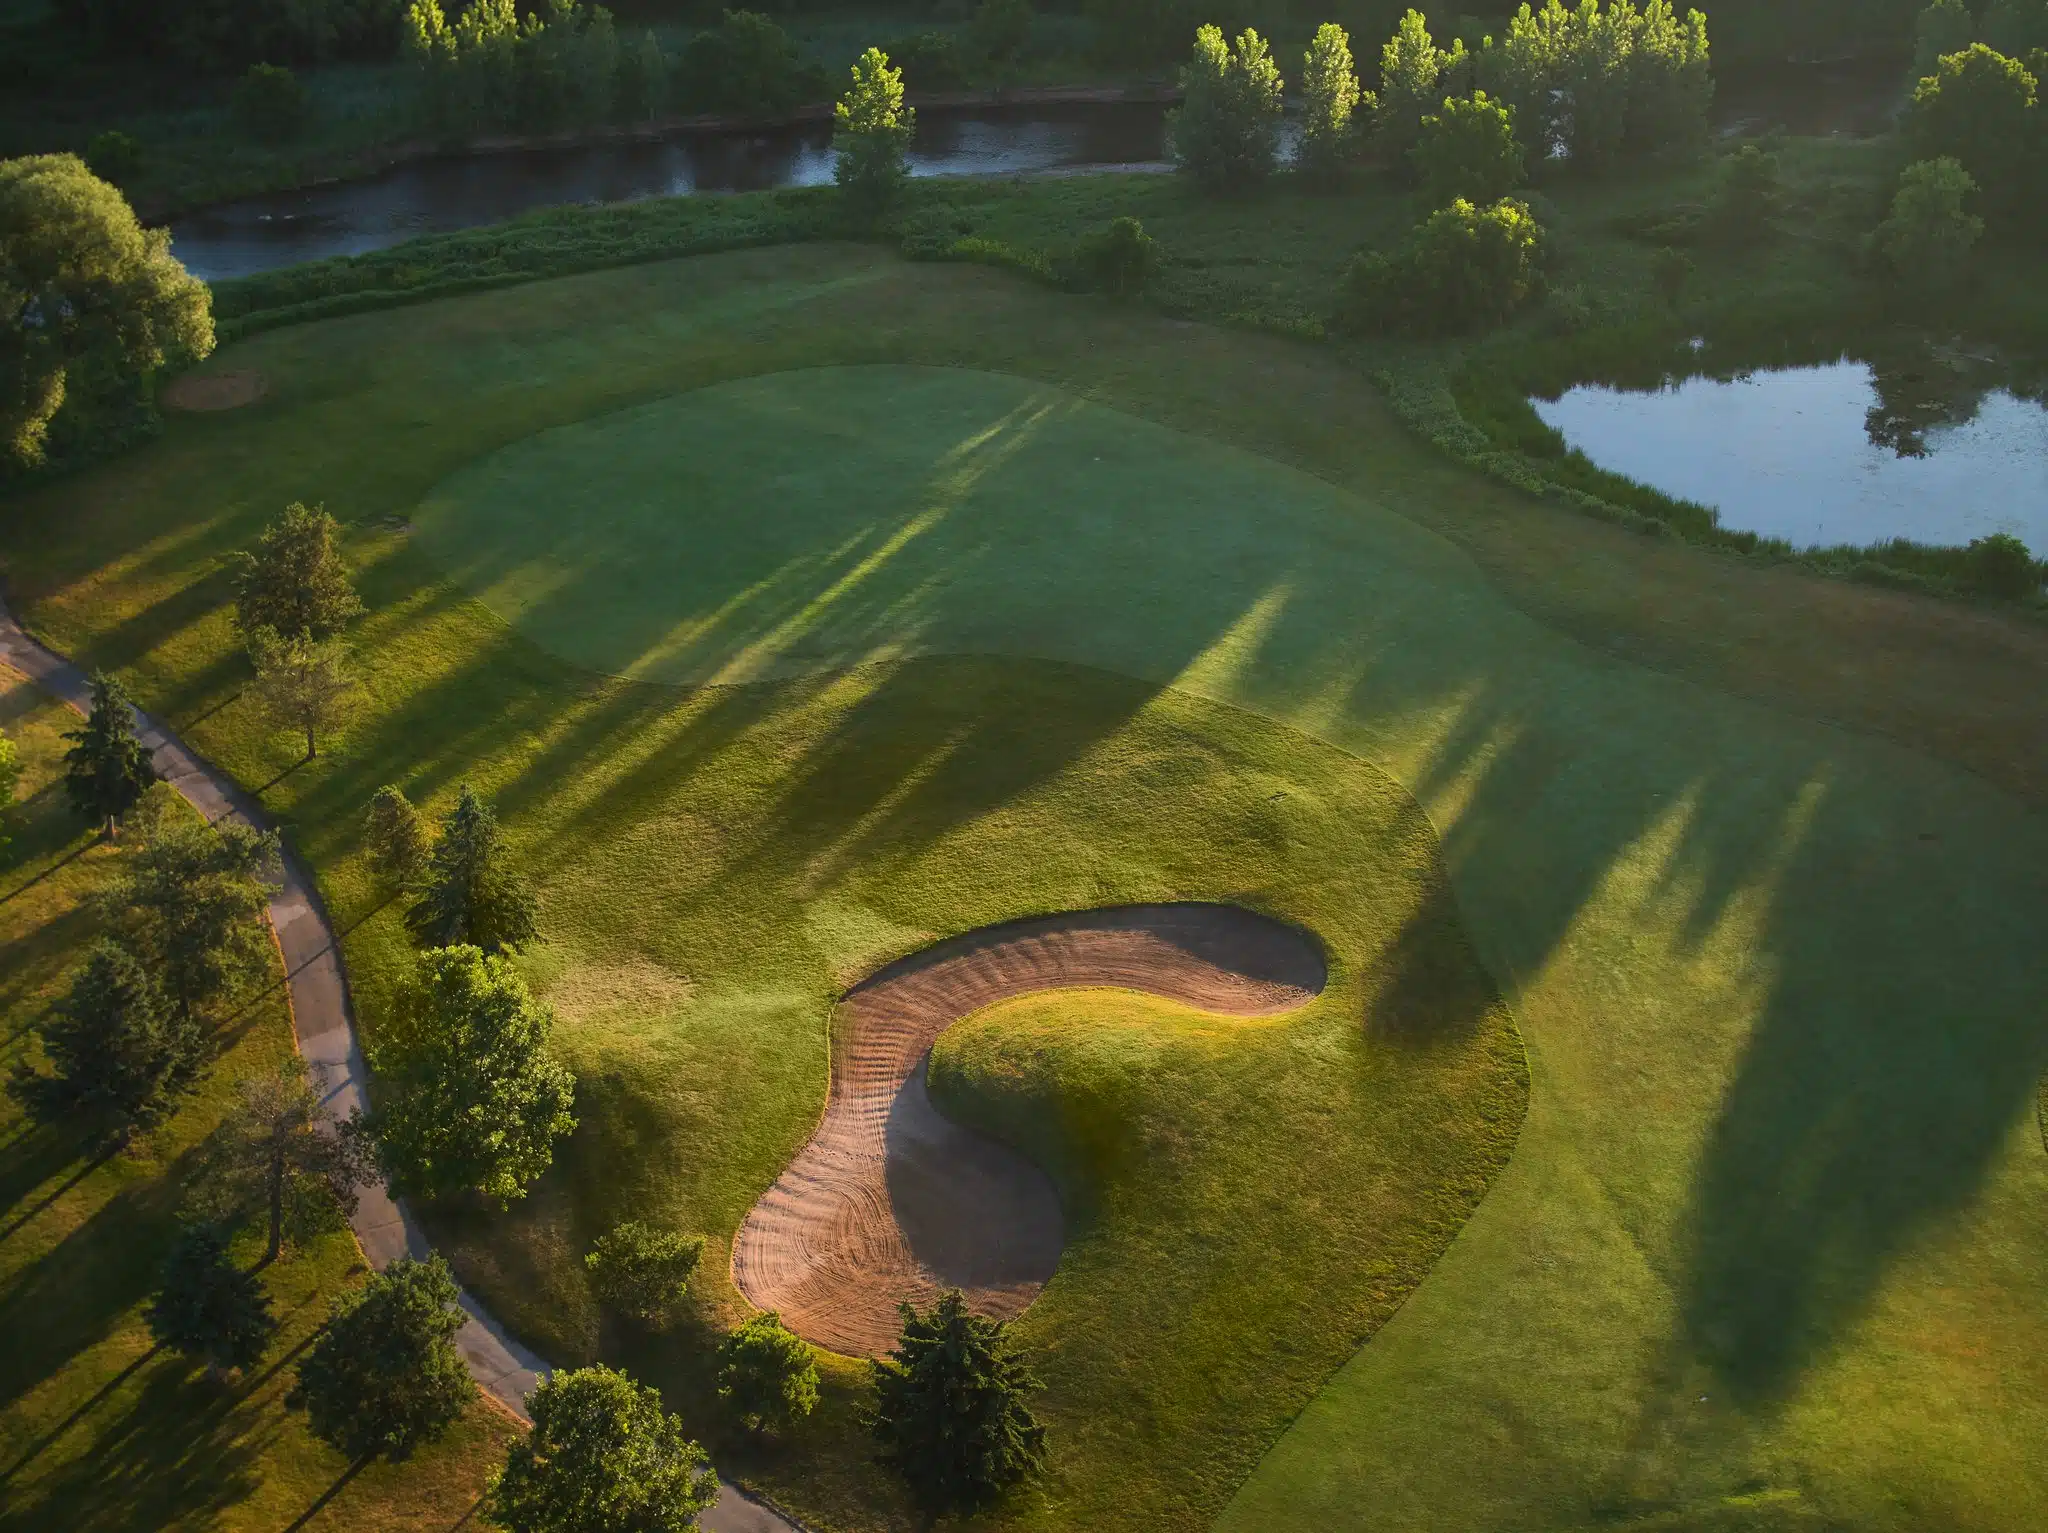 Aerial image of sand trap with water features in the background.